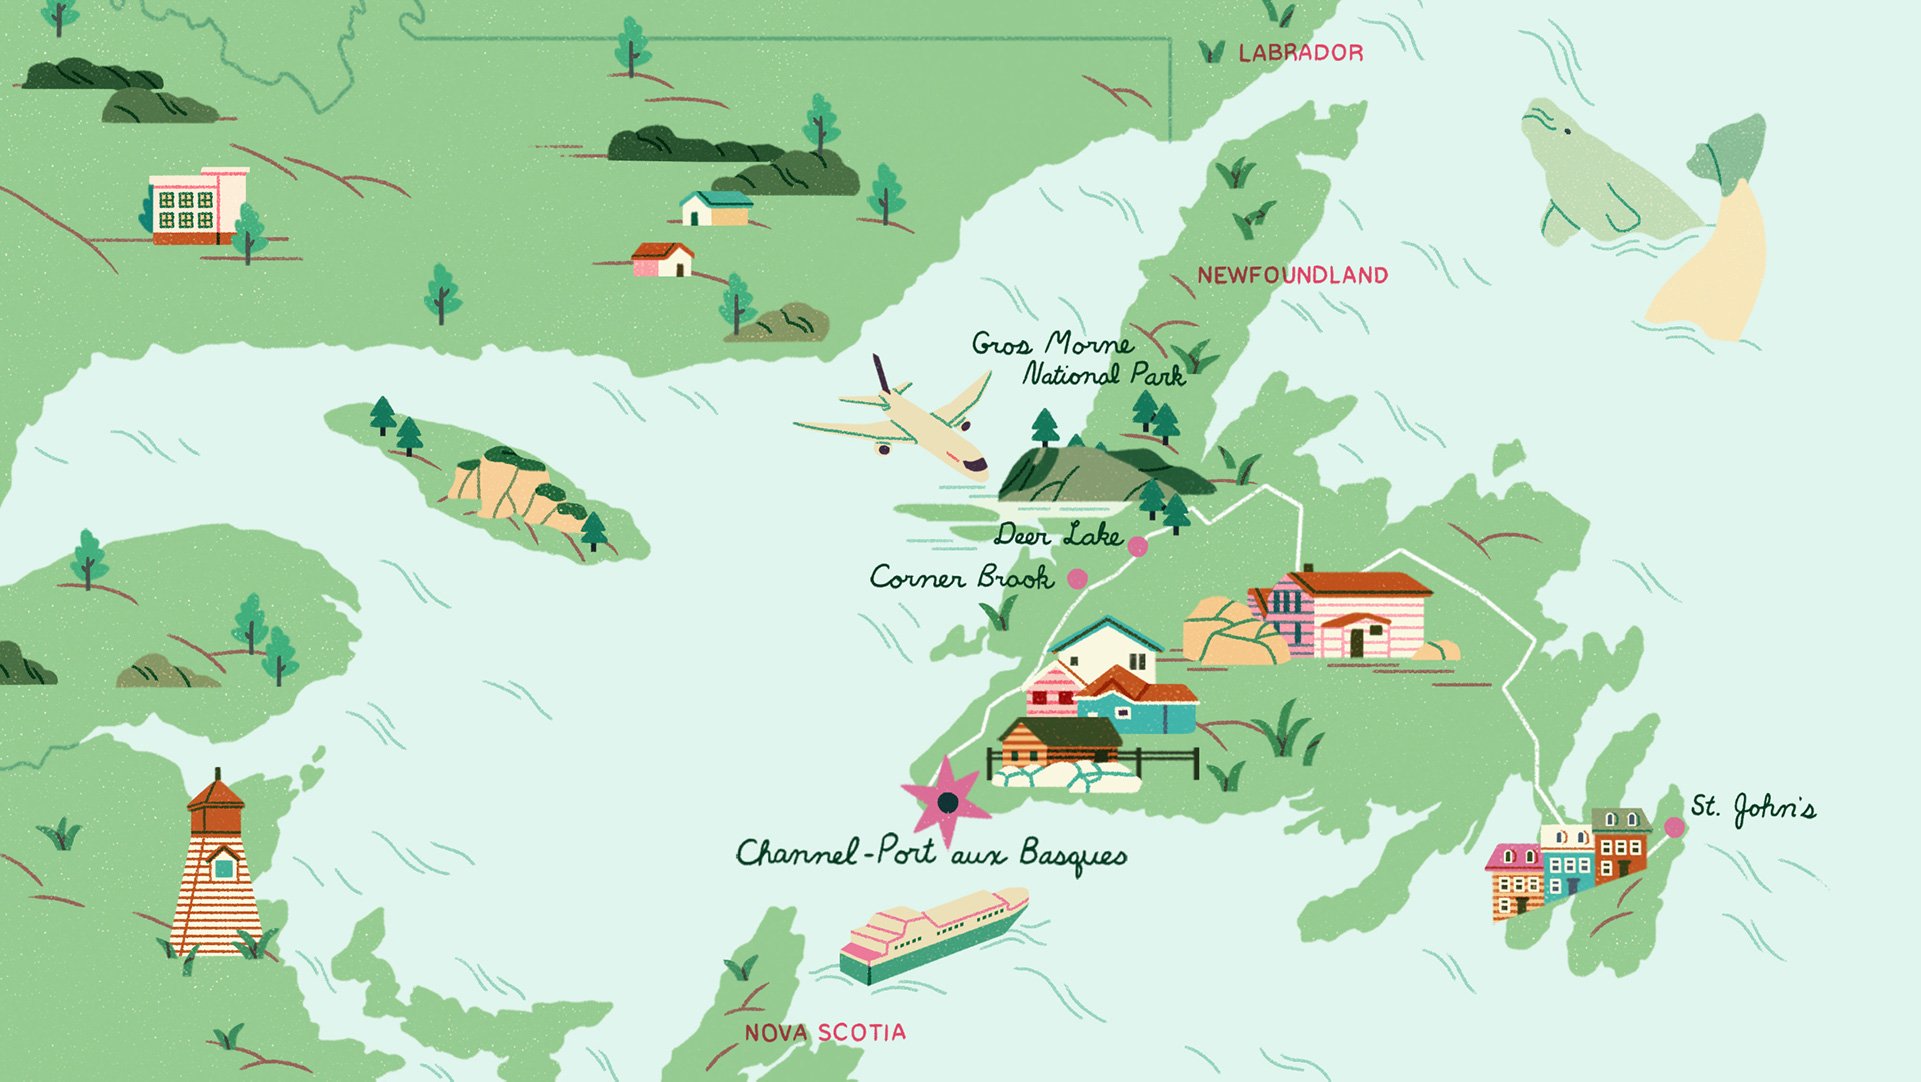 Map Channel-Port aux Basques in Newfoundland